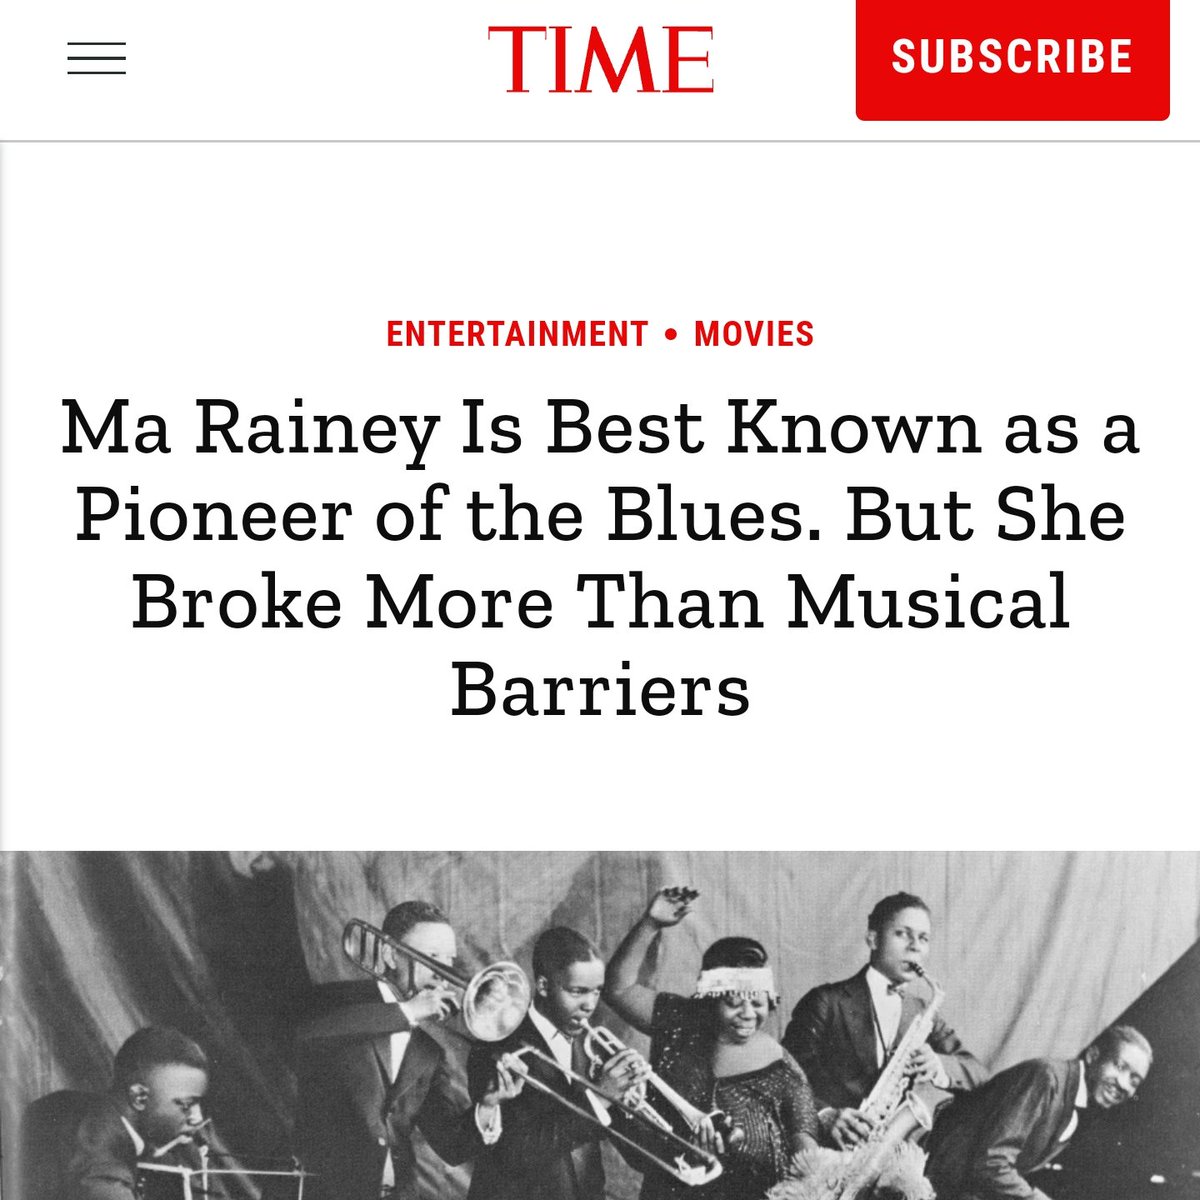 TODAY IN HISTORY 1886 — Ma Rainey, “Mother of the Blues' is born. She broke more than musical barriers. She wrote perhaps the earliest odes to lesbianism on record. 🎶“Went out last night with a crowd of my friends. They must’ve been women, ‘cause I don’t like no men.🎶 ...